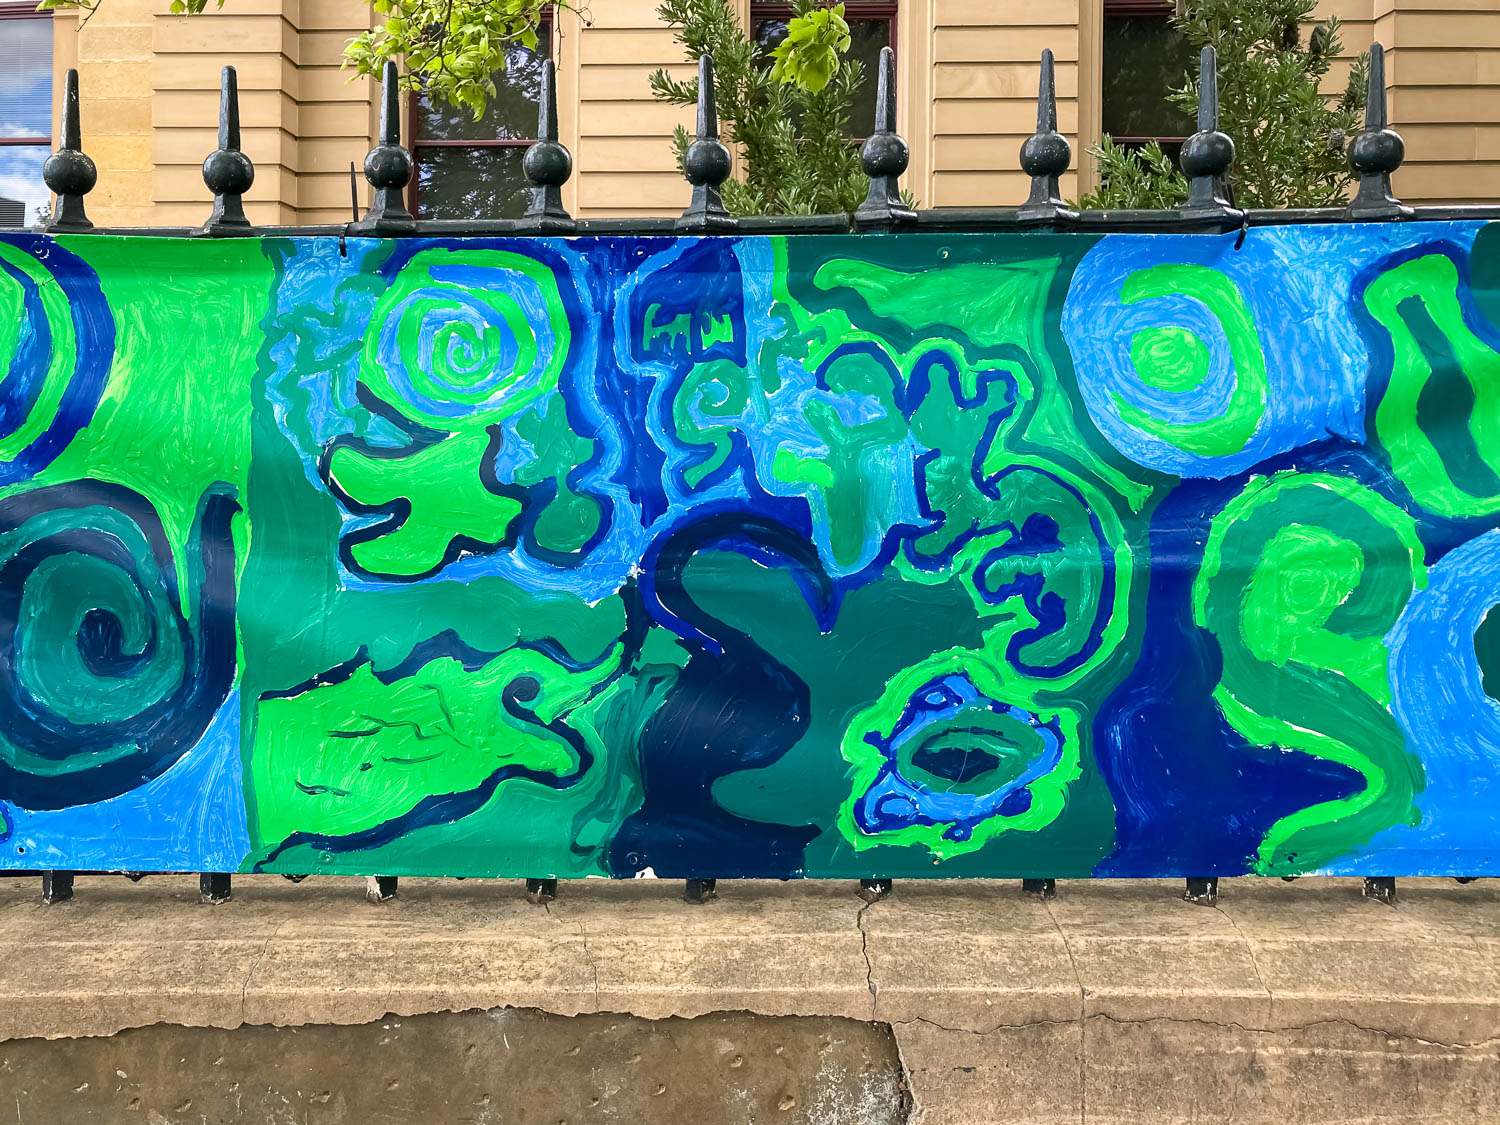 A green and blue swirling artwork on a banner on a wrought iron fence outside a sandstone building